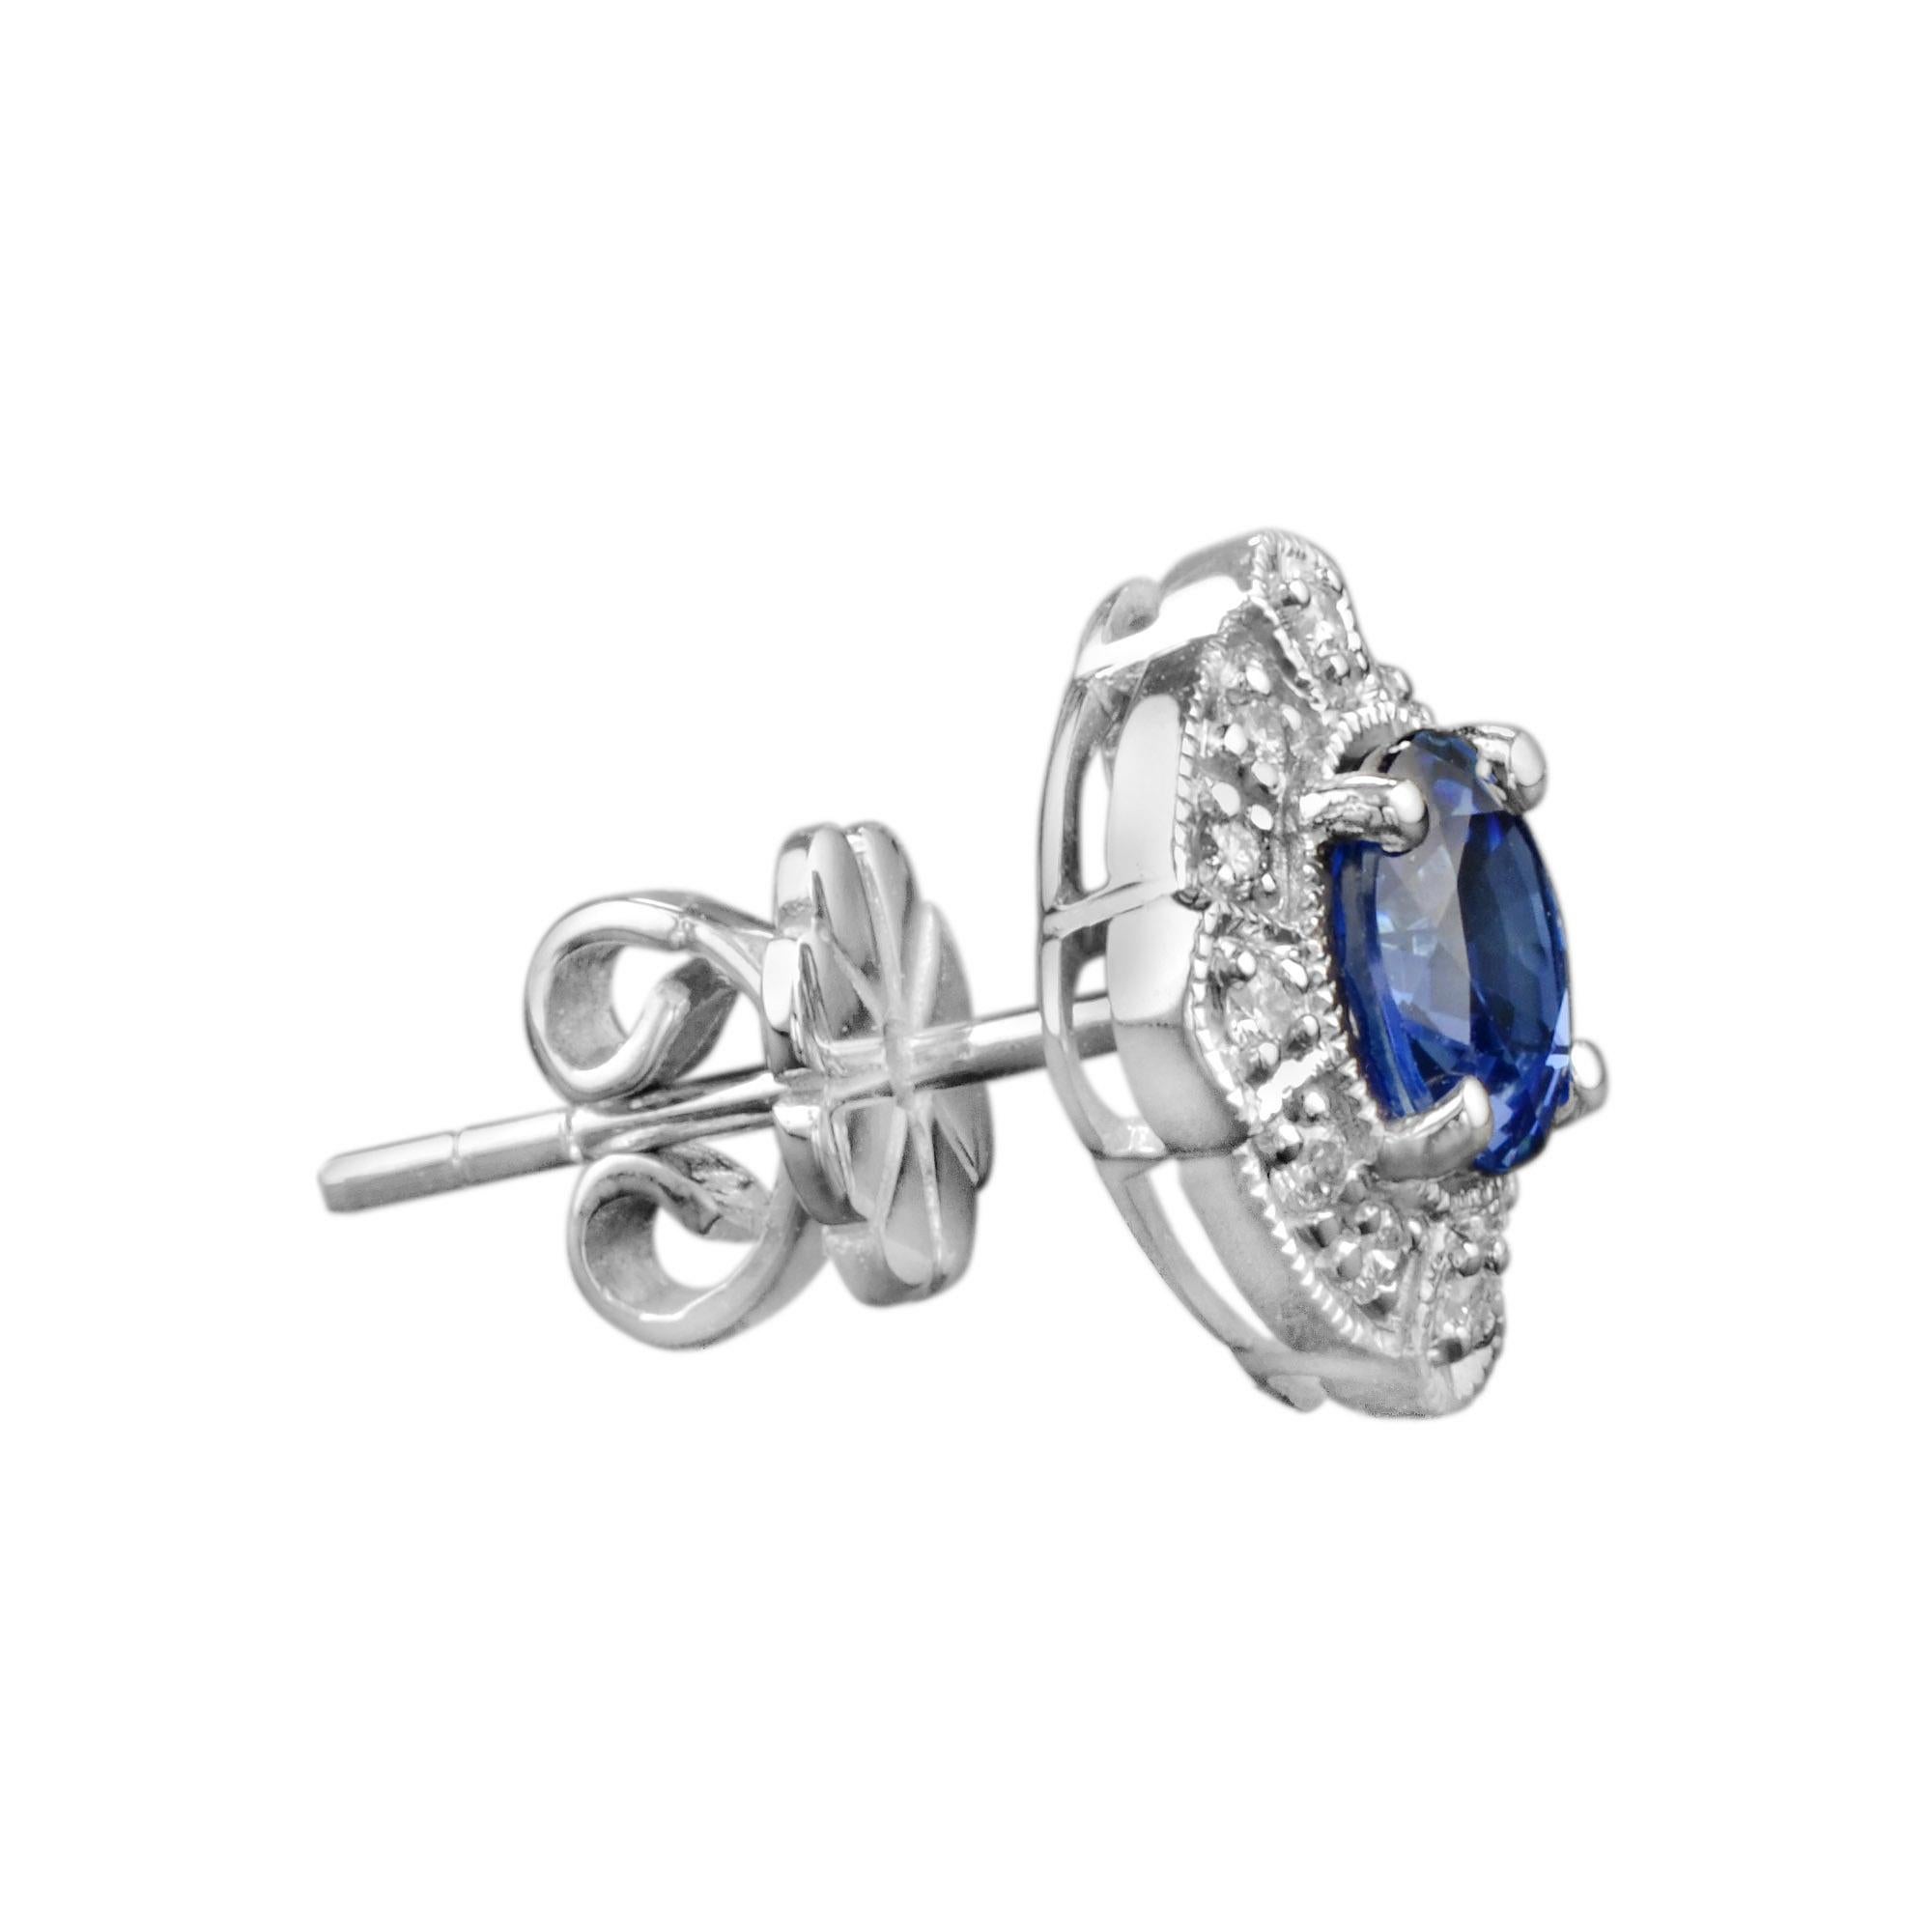 These gorgeous Ceylon sapphire and diamond stud earrings have been crafted from the finest 18K white gold. A stunning surface polish has been applied to the surface of earrings to bring out the deep hue of the round cut sapphire gemstone hold at the